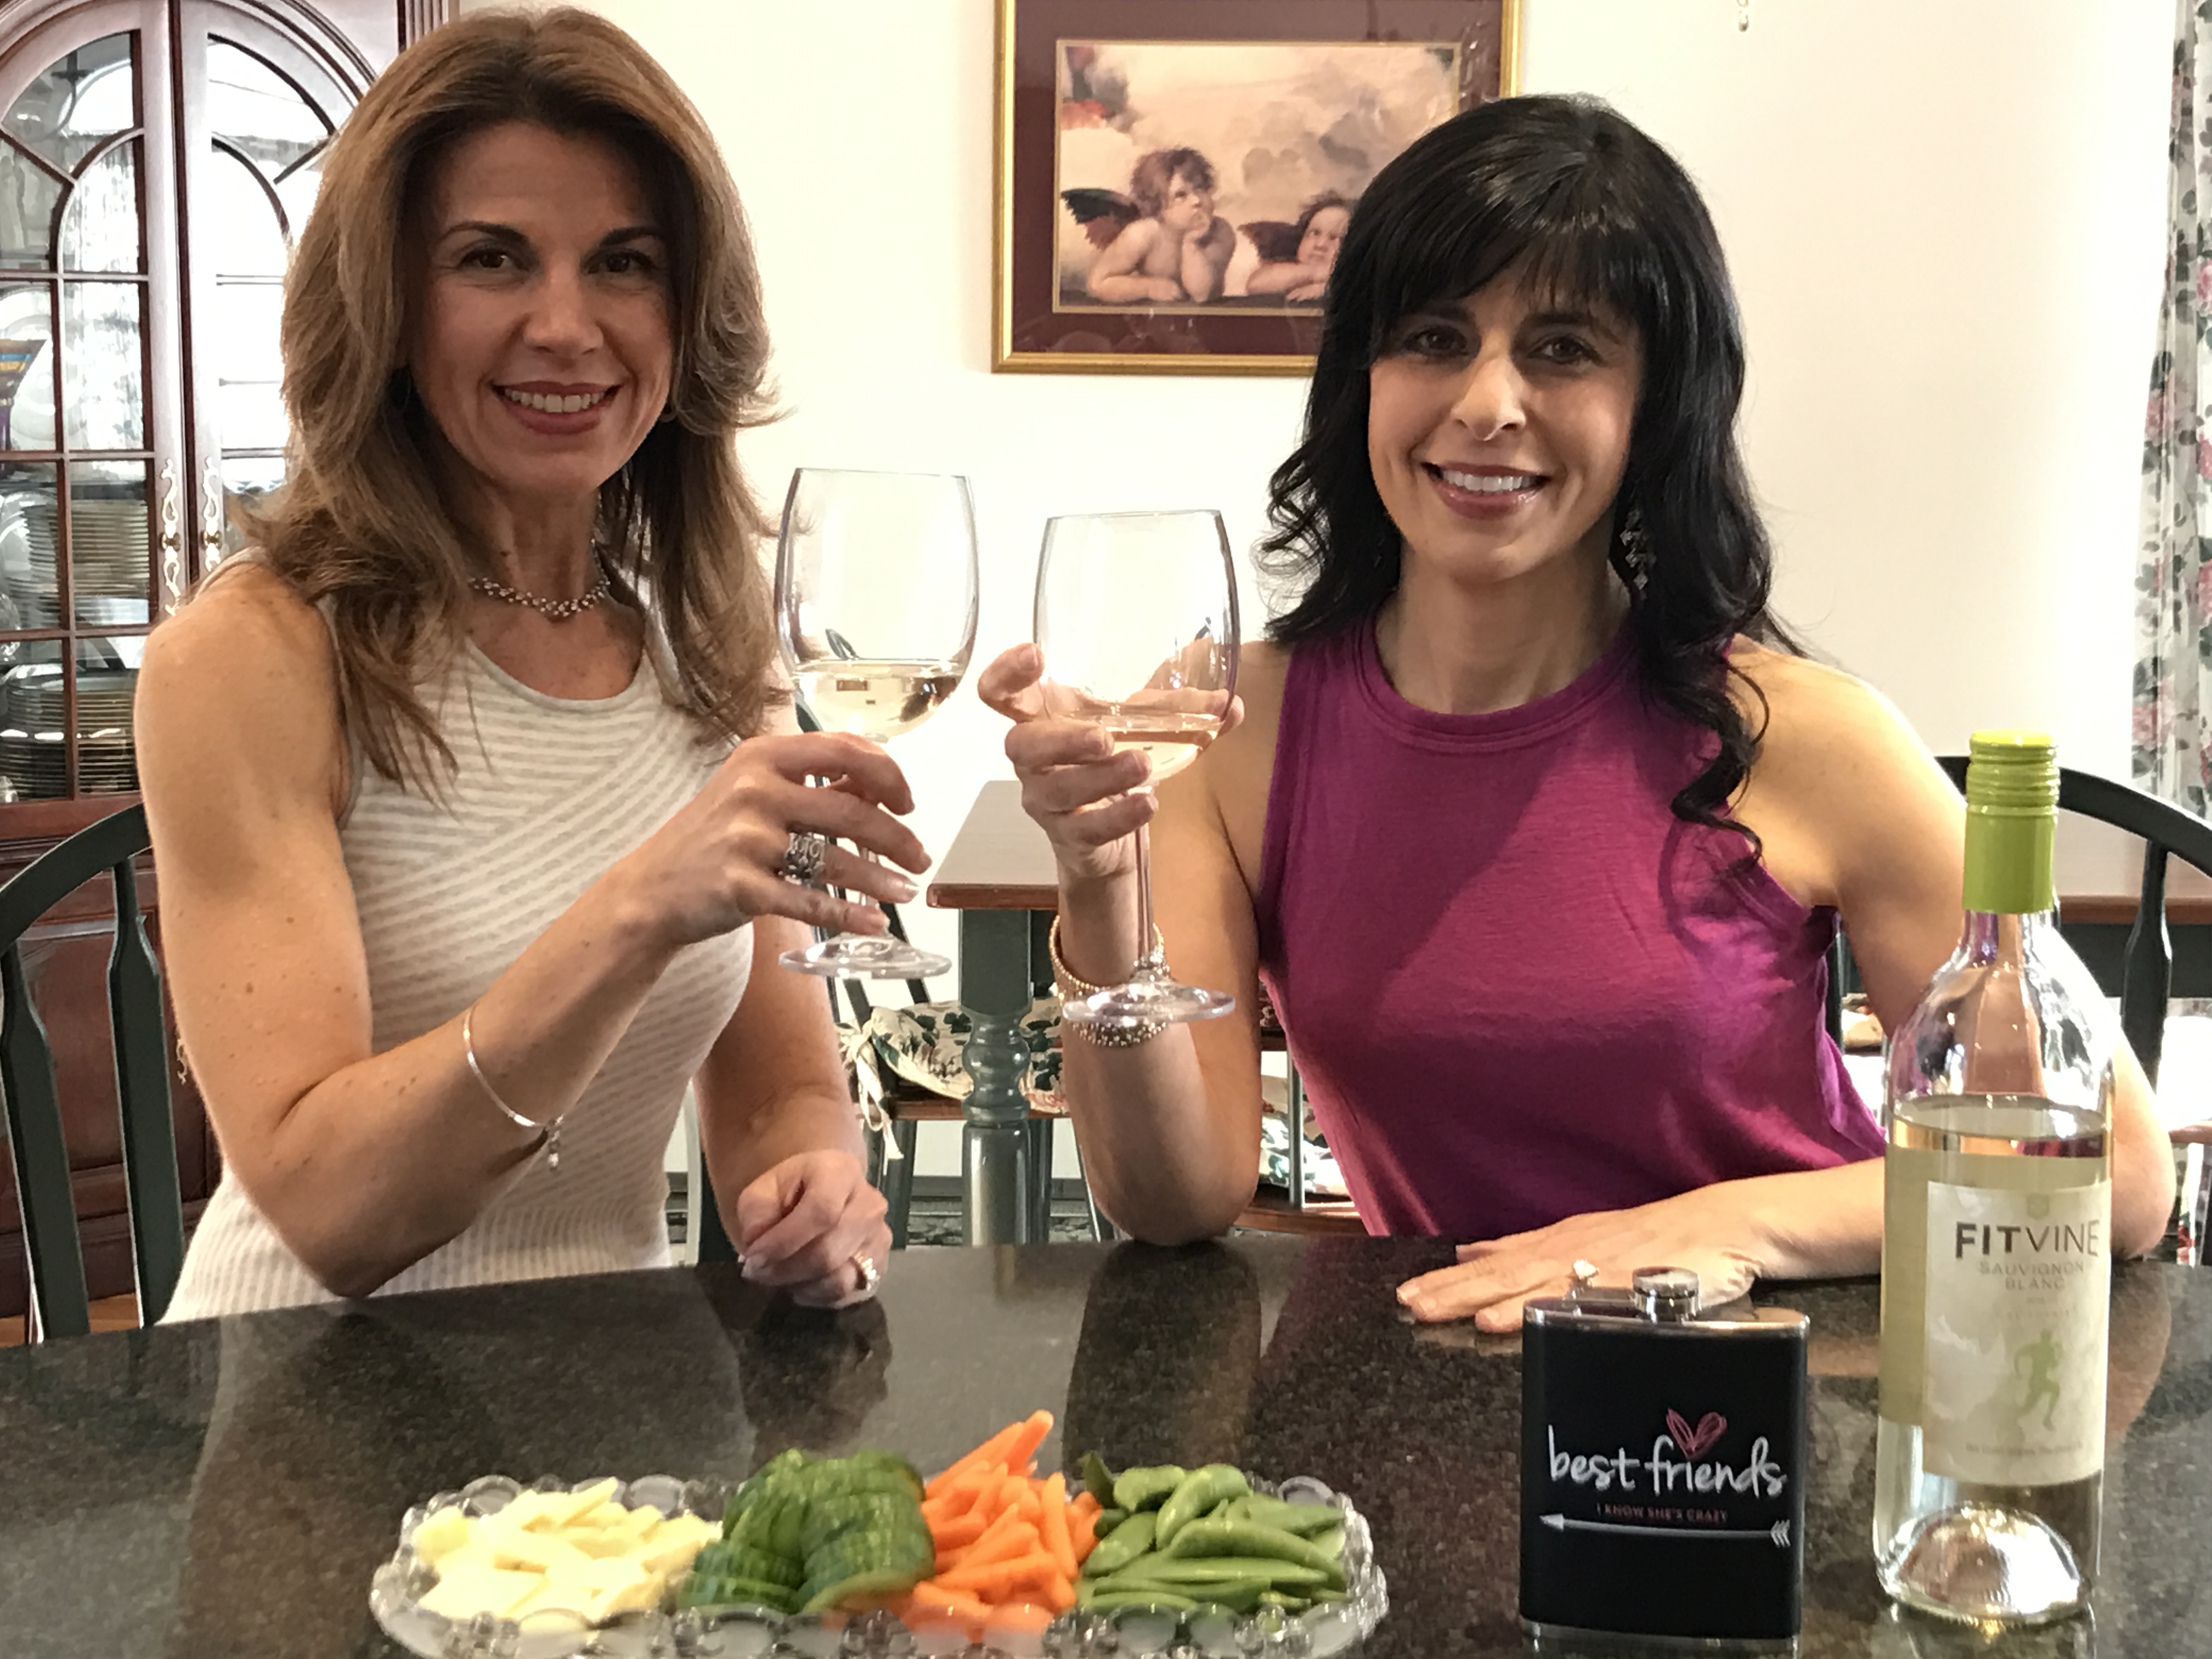 Fun Time With FitVine Wine! A Review by Charlene Bazarian & Nancy Hughes